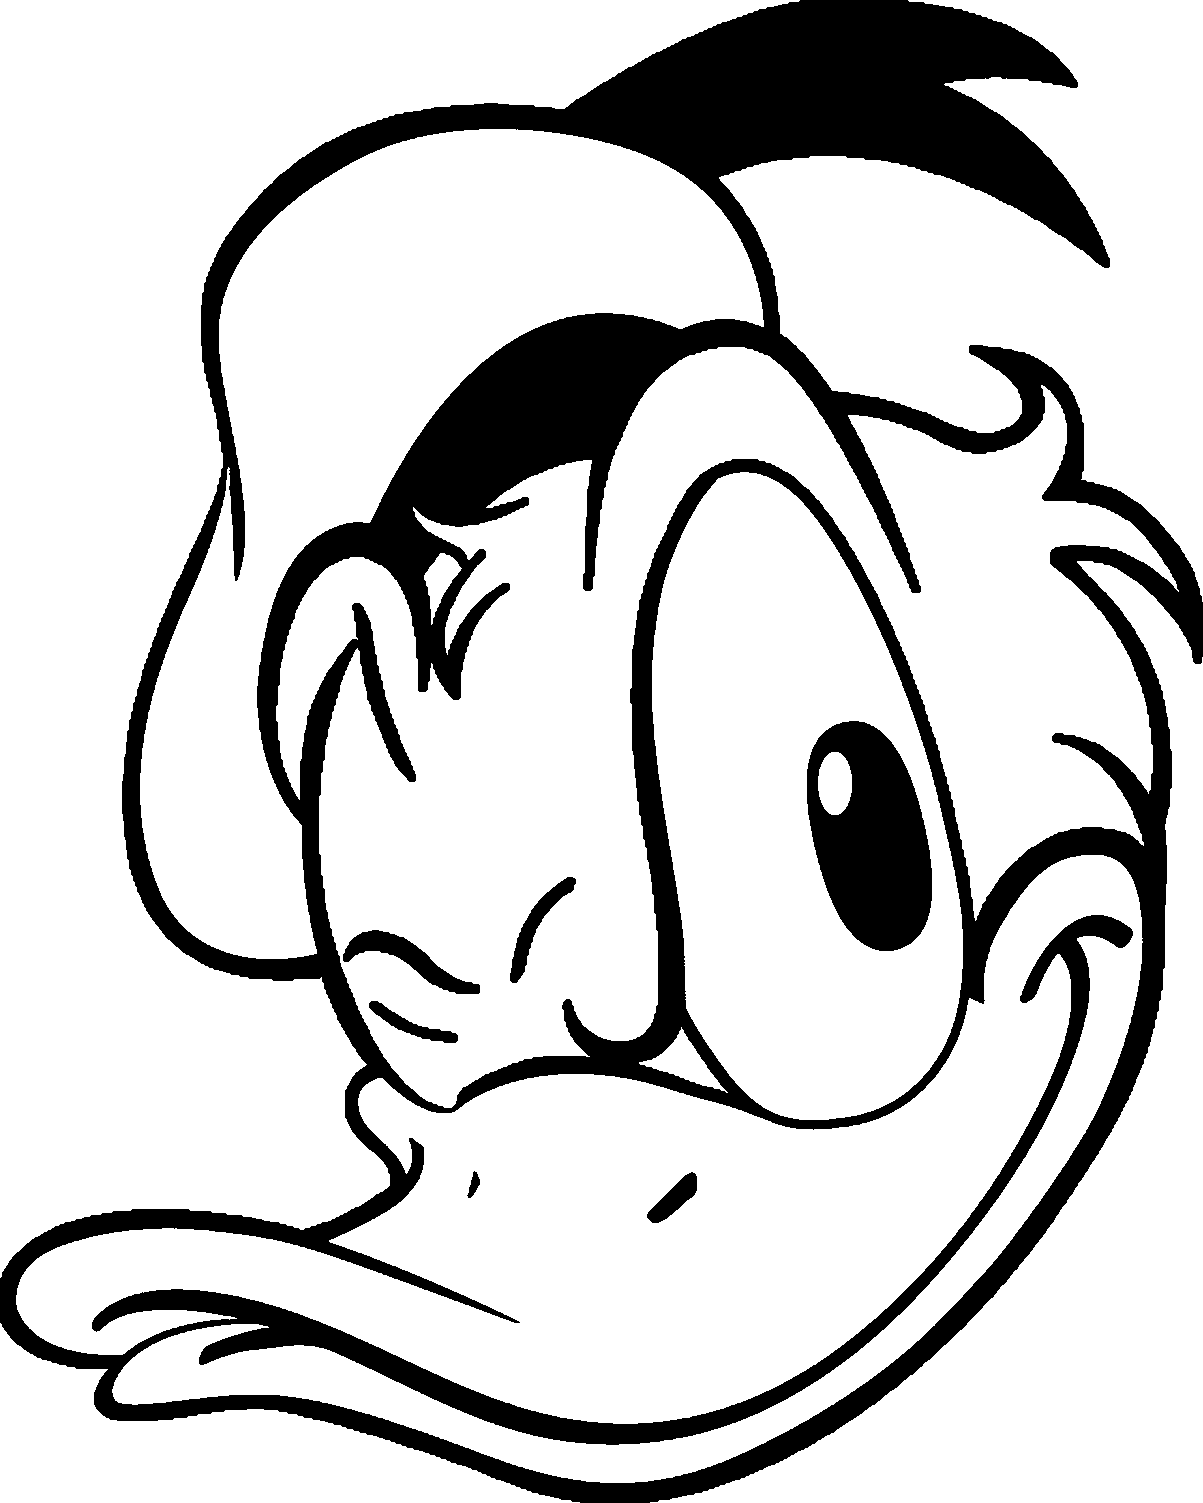 Donald Duck Coloring Page WeColoringPage 079 | Wecoloringpage